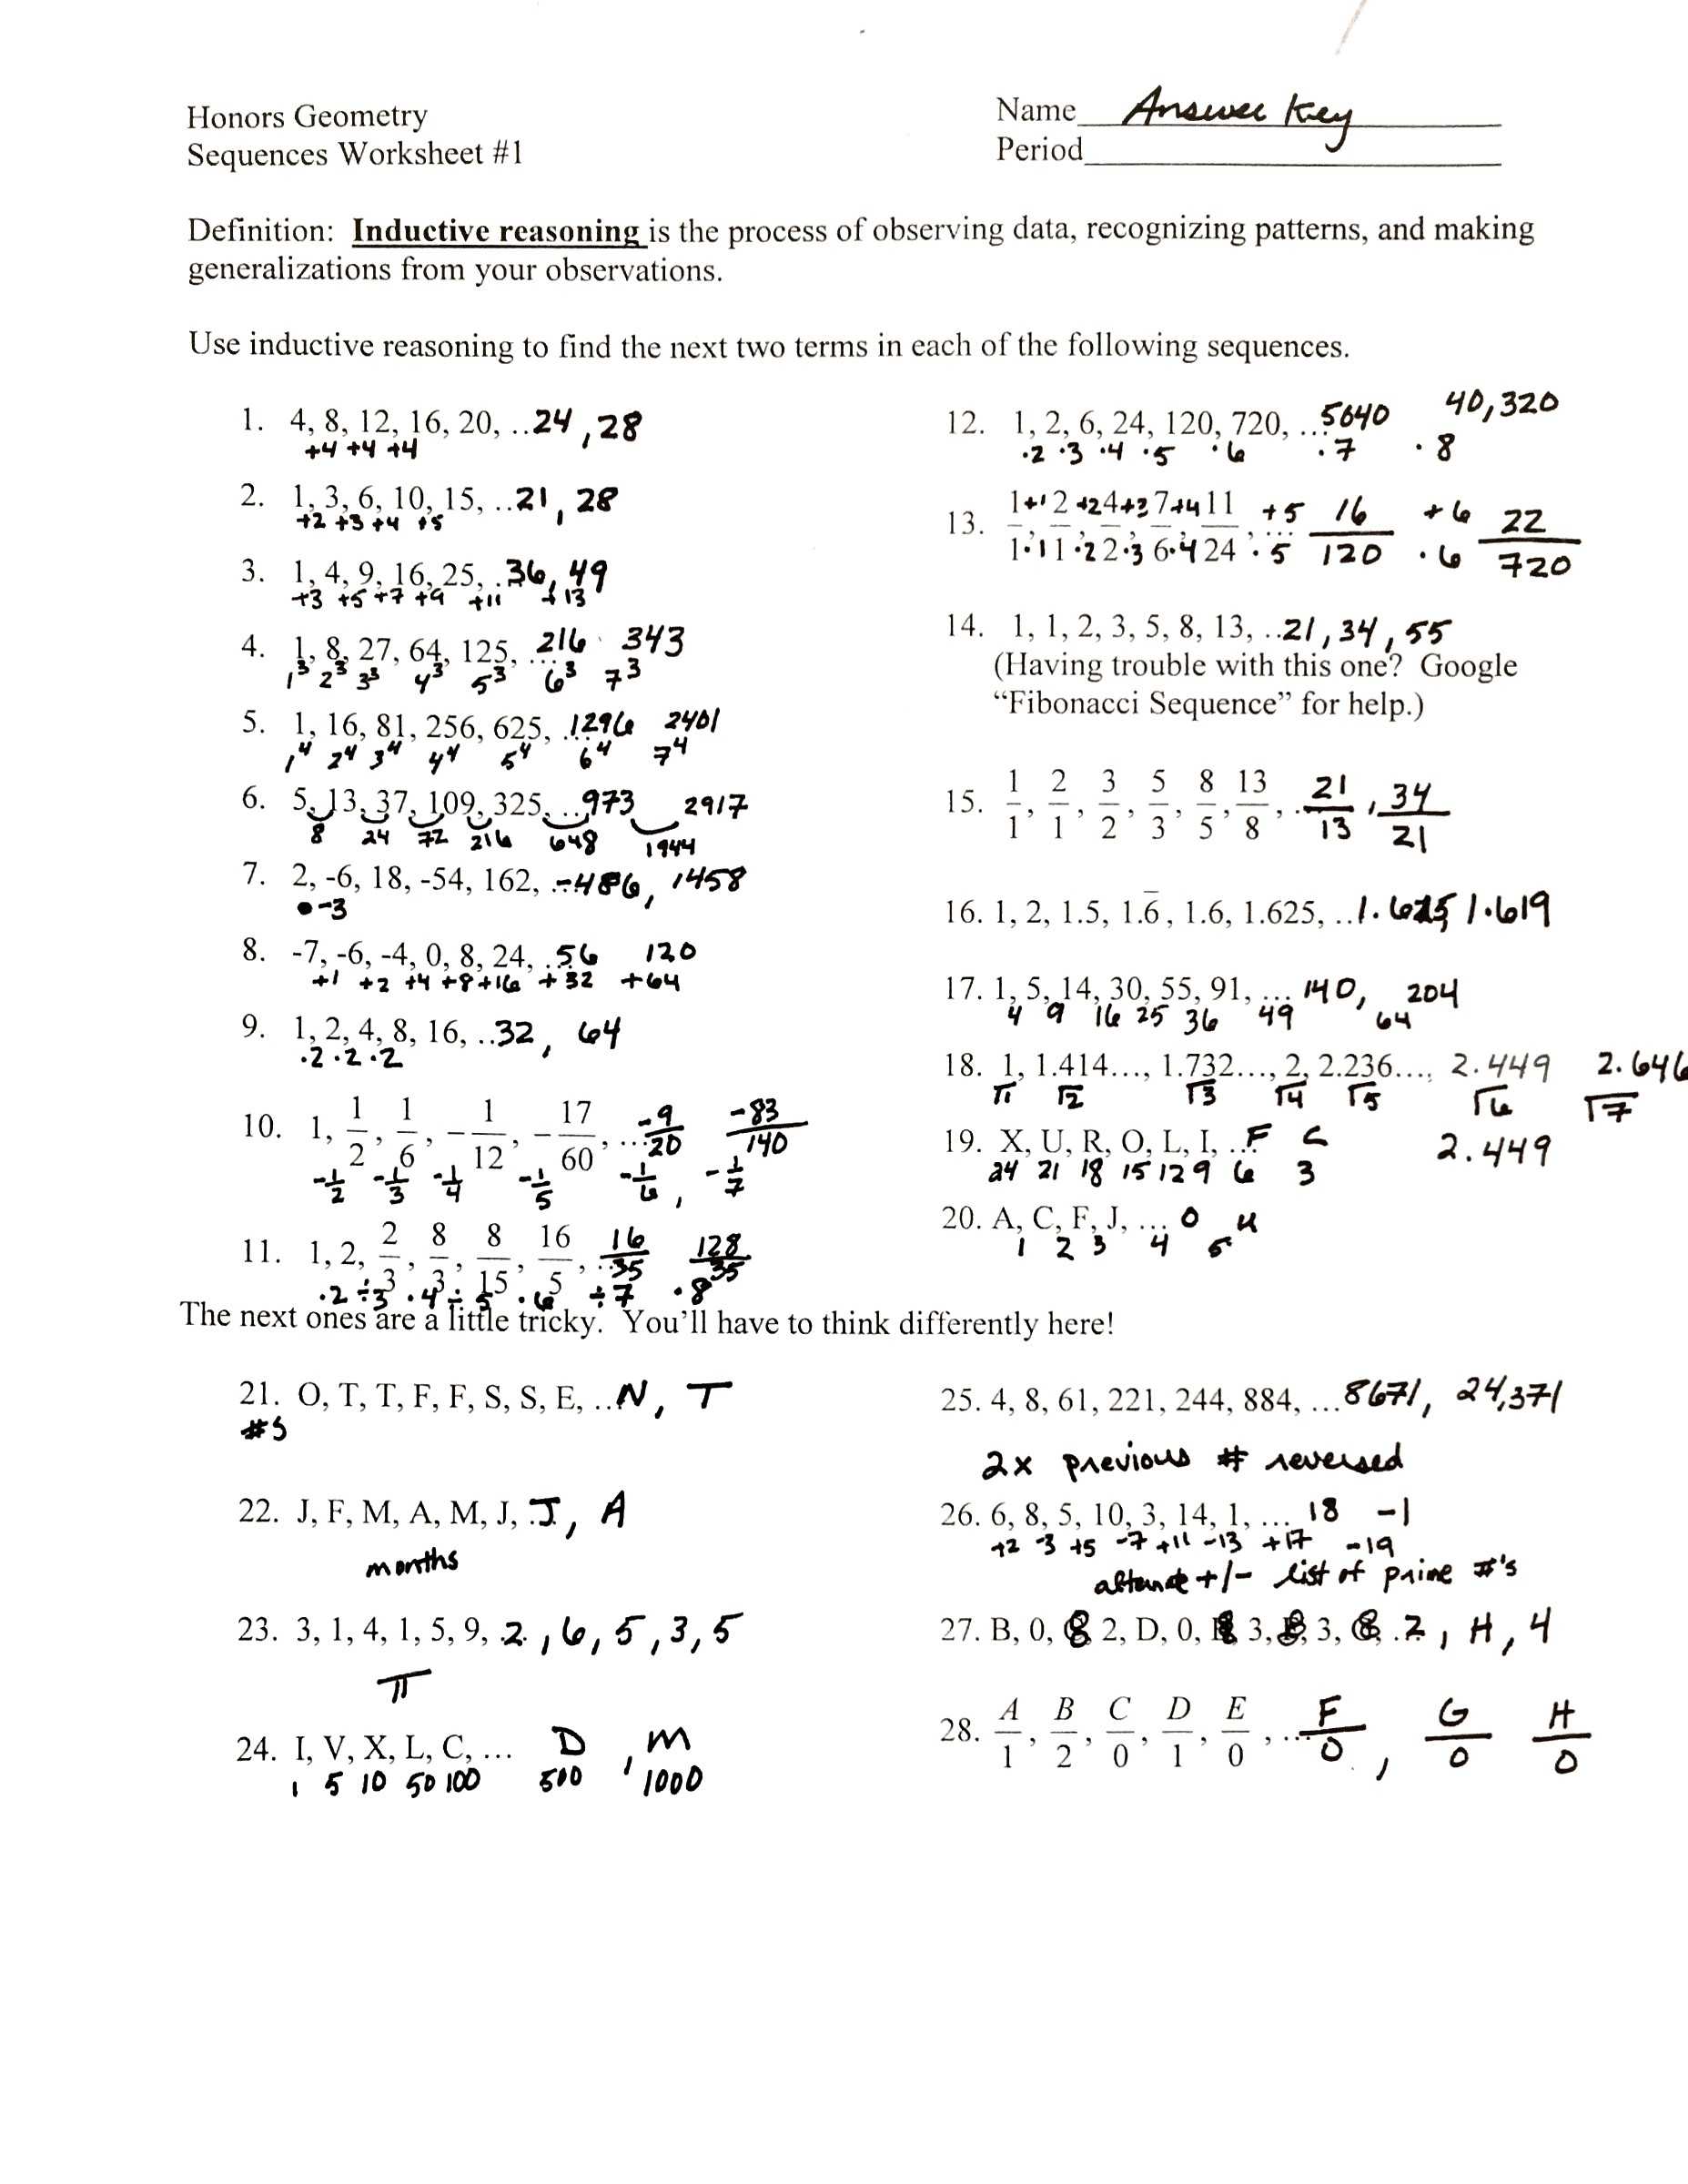 Arithmetic Sequences and Series Worksheet Answers as Well as Arithmetic Sequences and Series Worksheet Answers Unique Salles Lisa